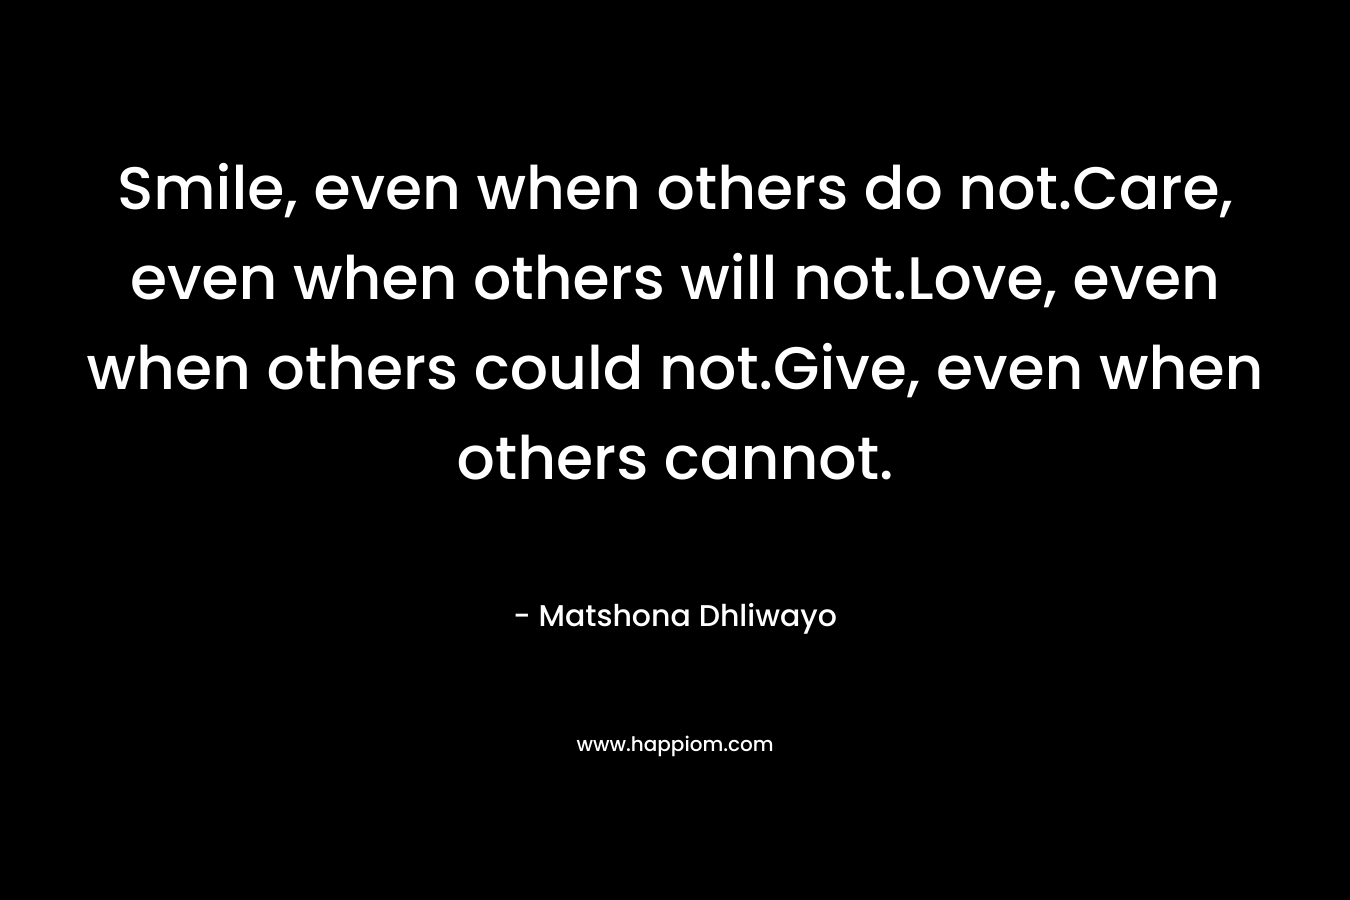 Smile, even when others do not.Care, even when others will not.Love, even when others could not.Give, even when others cannot. – Matshona Dhliwayo